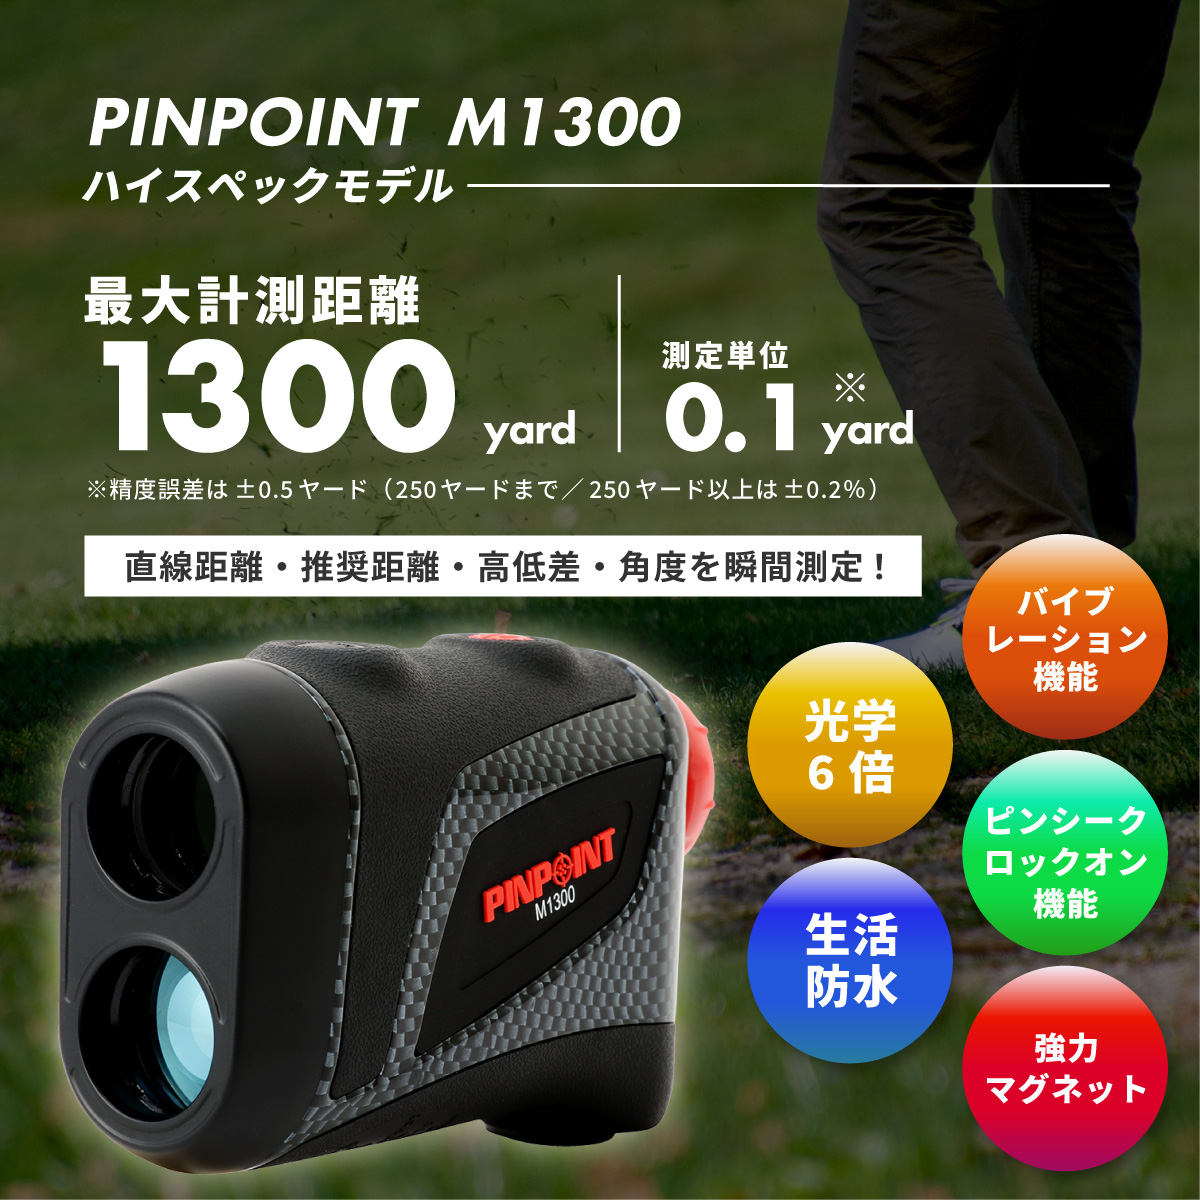 PINPOINT M1300